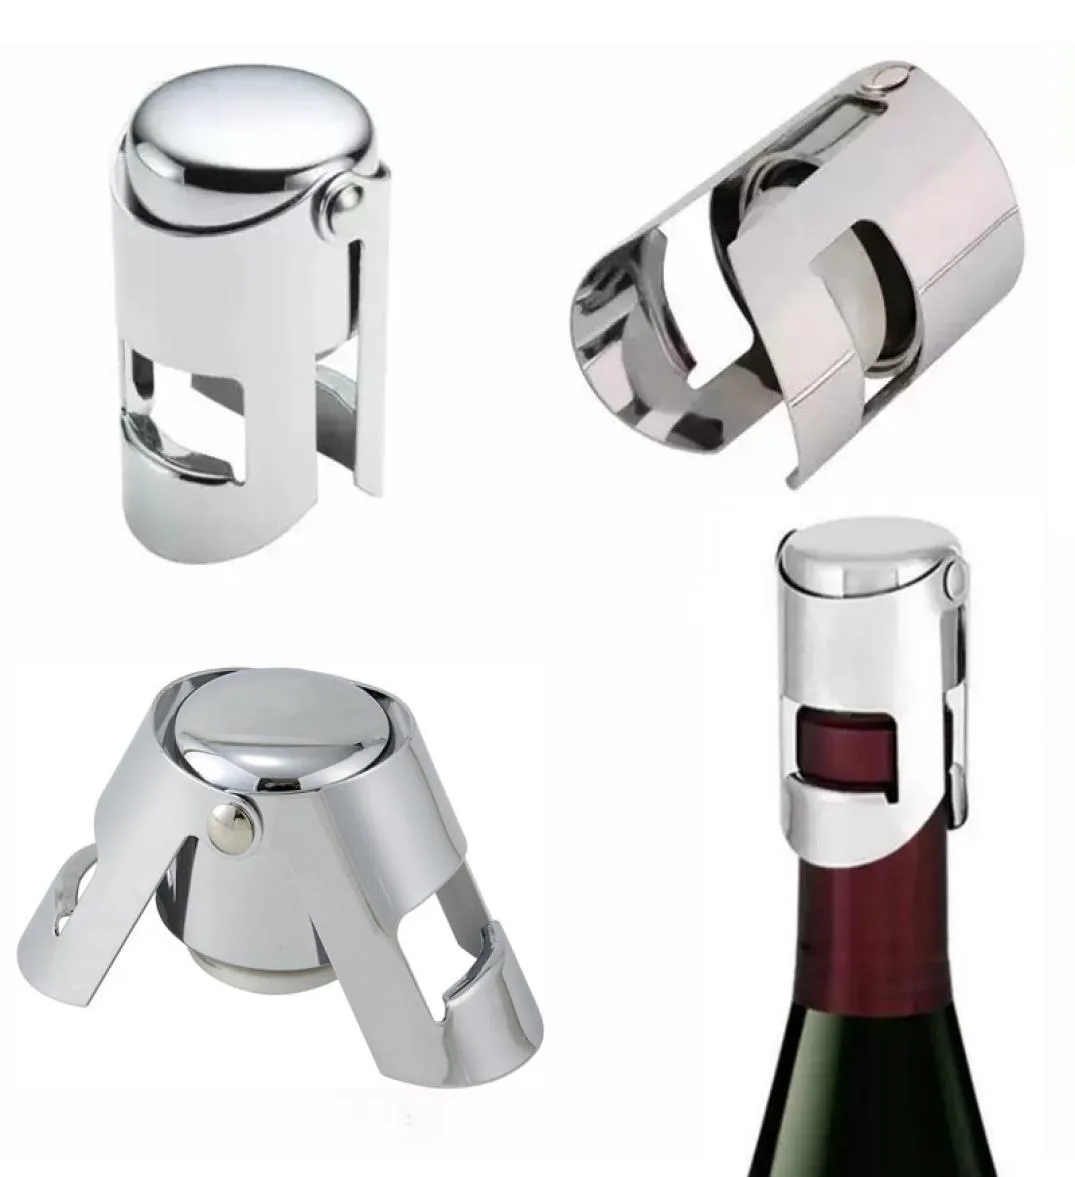 Portable Bar Tools Champagne Wine Bottle Stopper Stainless Steel Sealer Vacuum Sealed With Pure Silicone Air Tight Seal Profession5786684